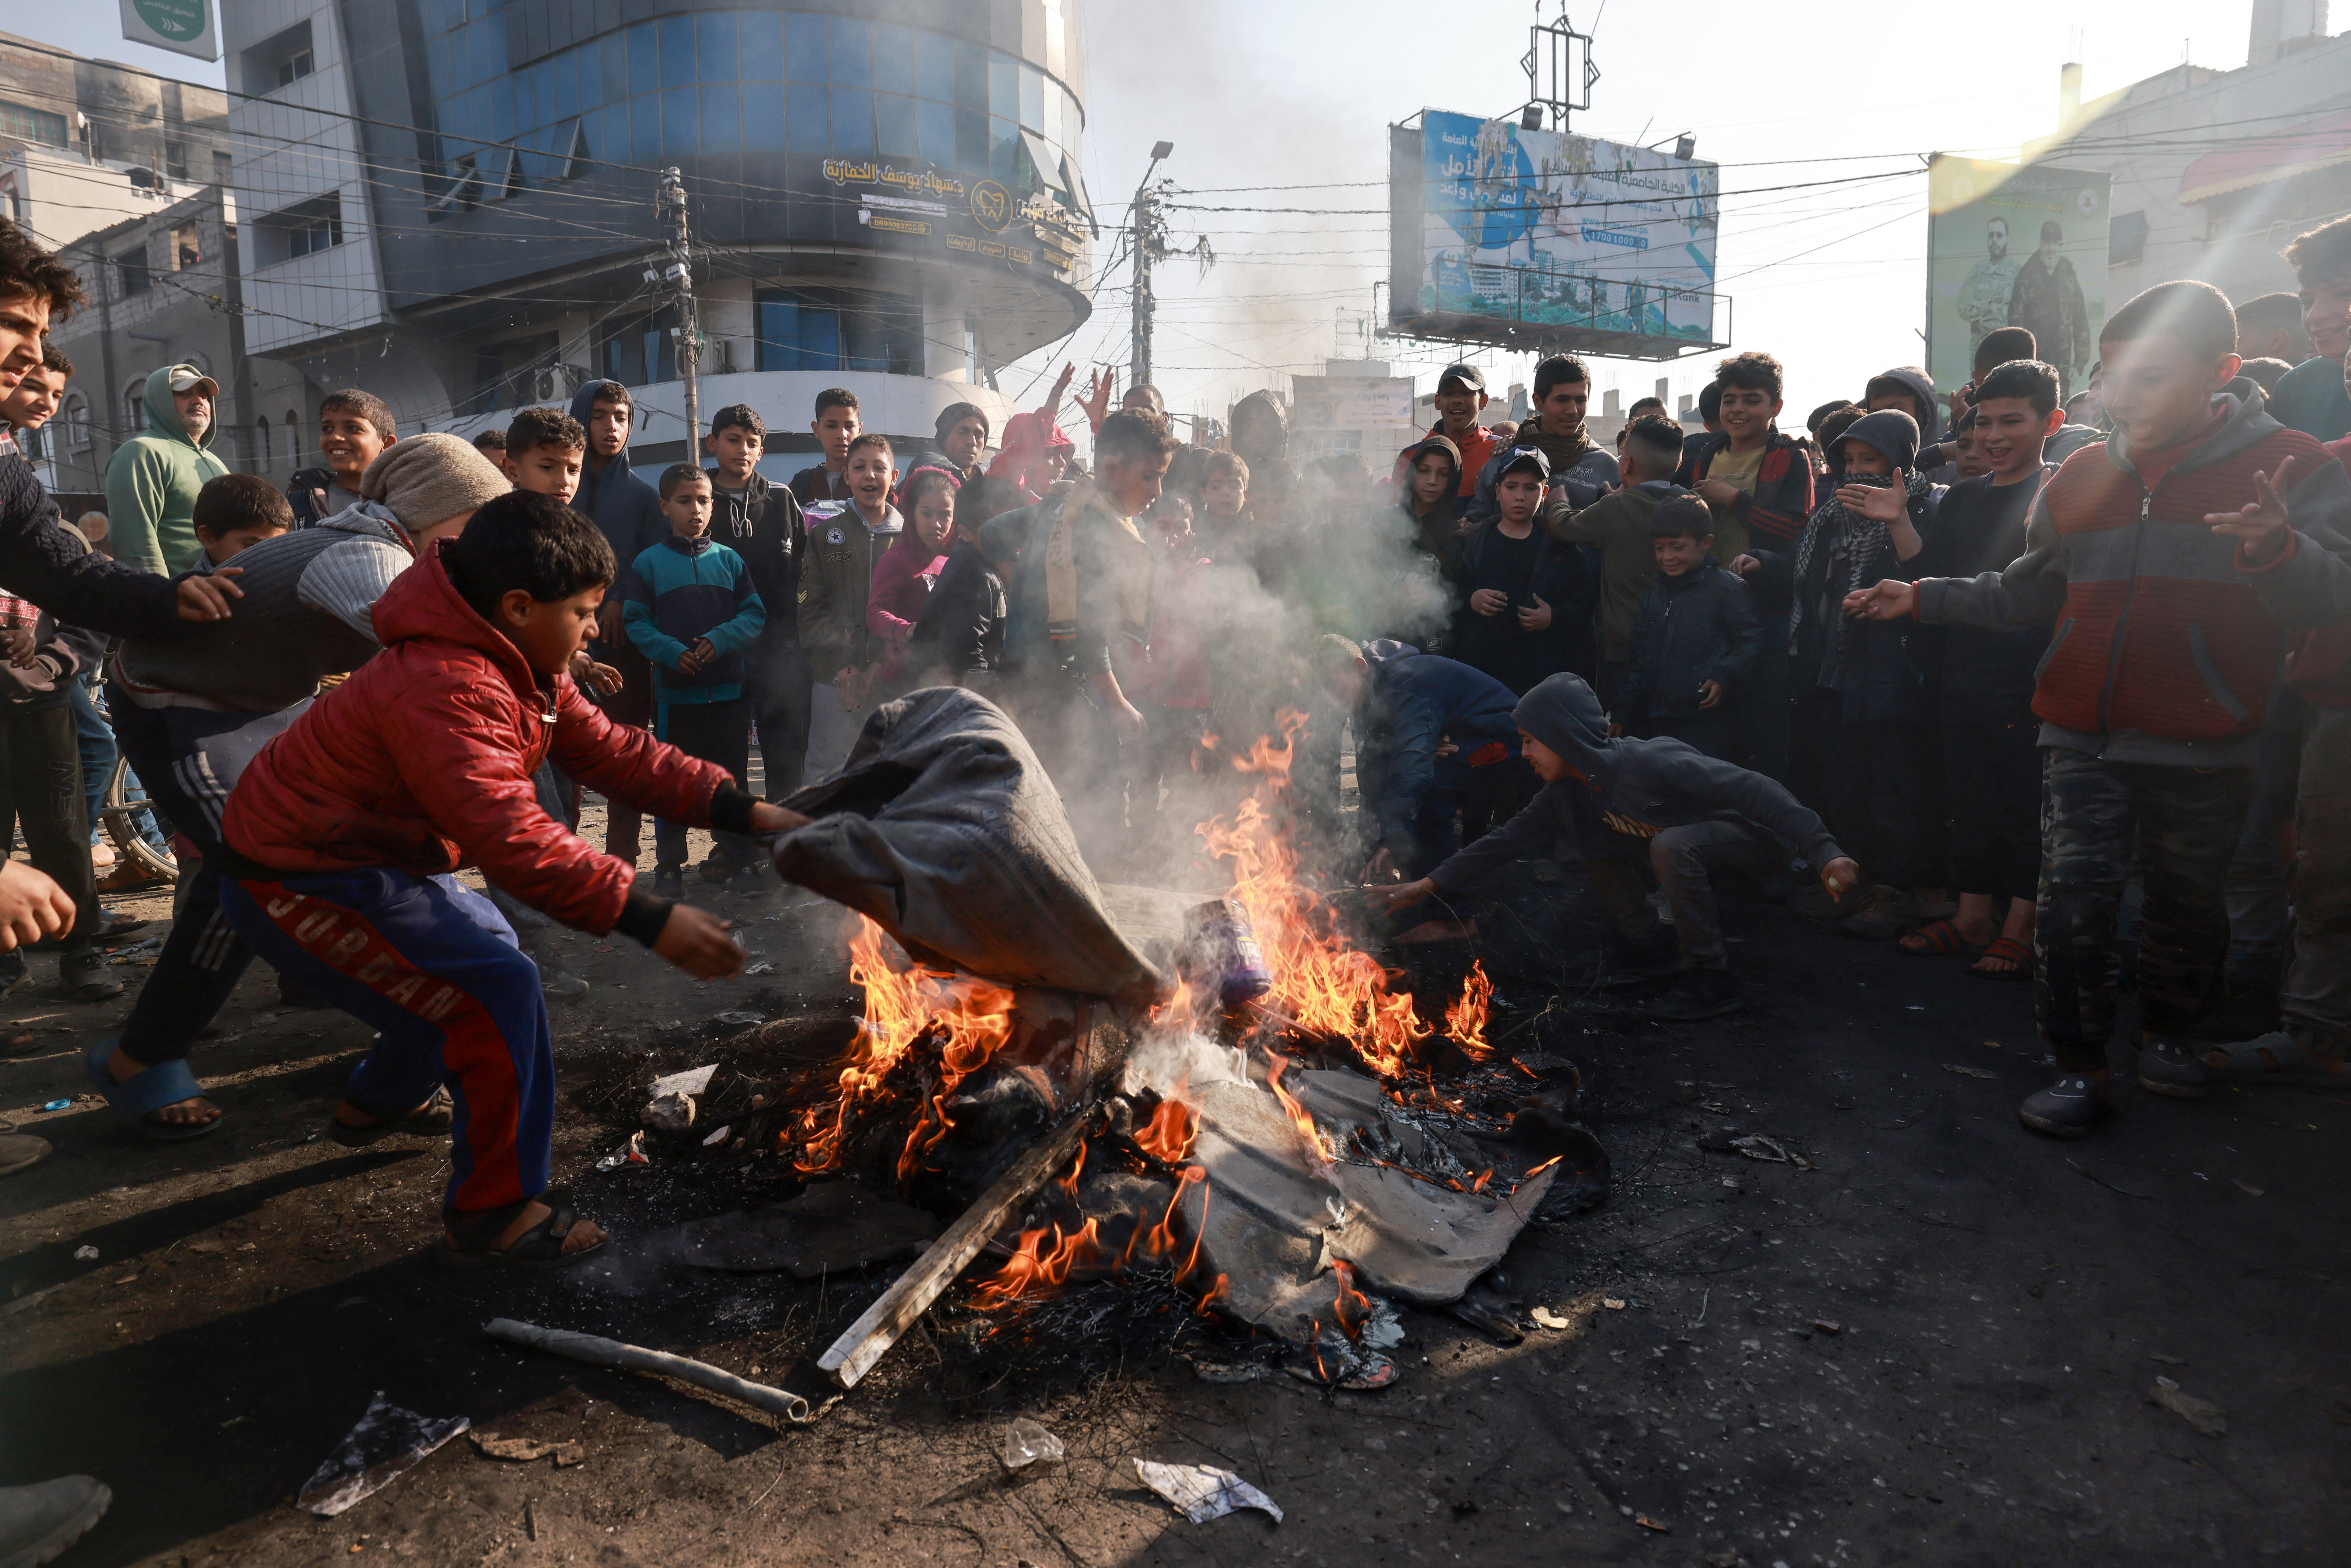 Palestinian children burn tires in protest against the rising prices of food and supplies due to shortages, in the Rafah refugee camp in the southern Gaza Strip. February 28, 2024. MOHAMMED ABED / AFP